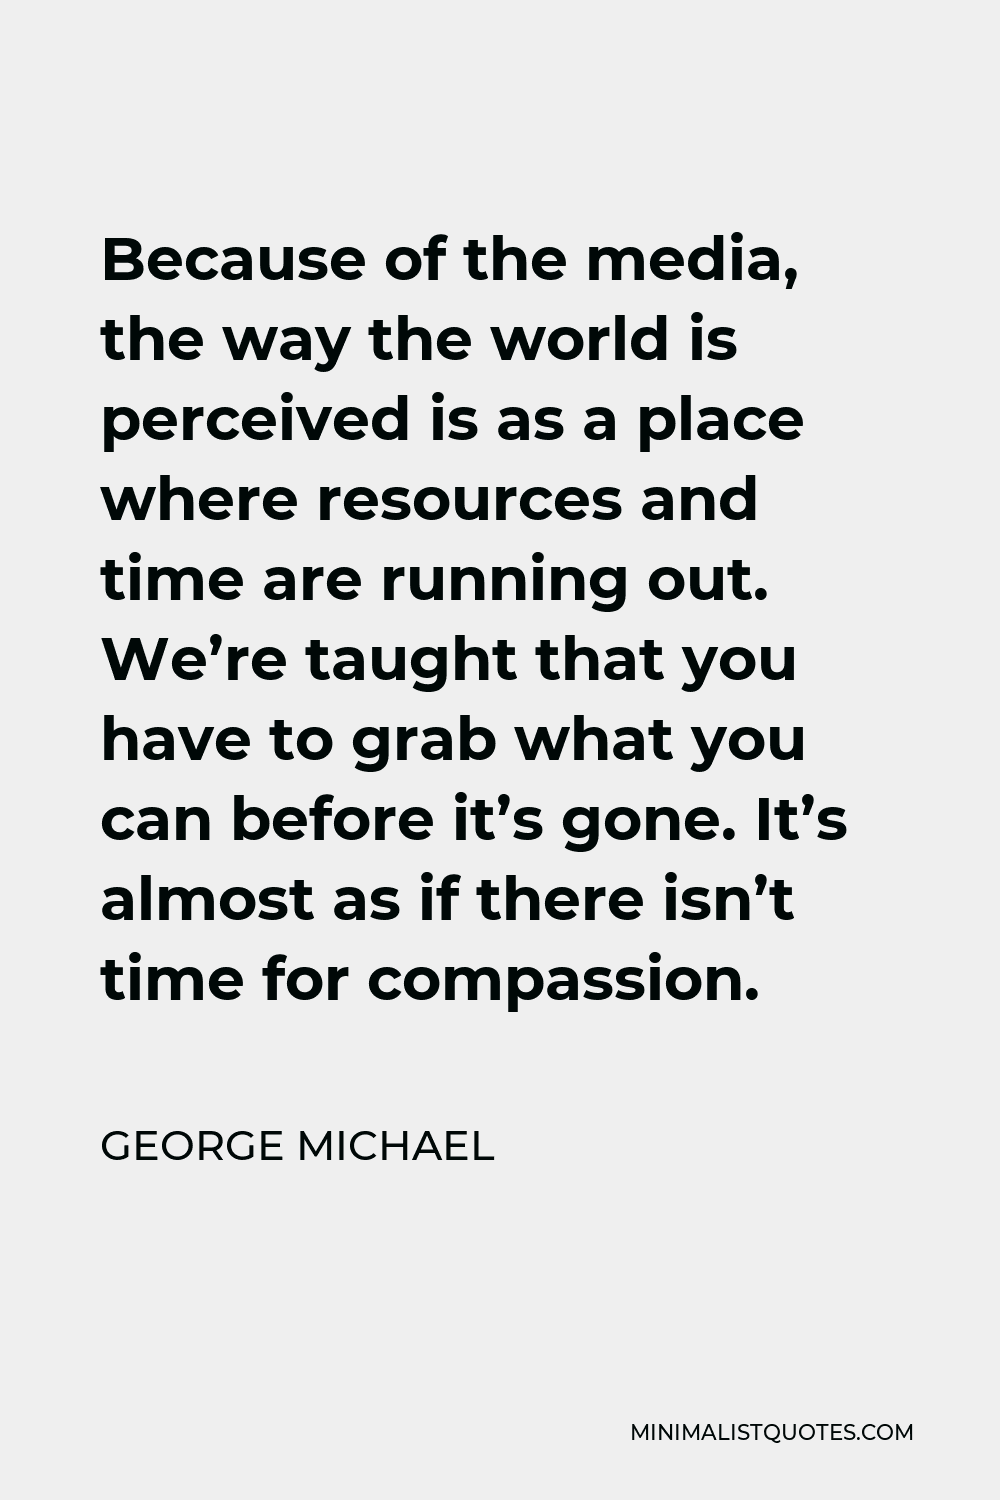 George Michael Quote - Because of the media, the way the world is perceived is as a place where resources and time are running out. We’re taught that you have to grab what you can before it’s gone. It’s almost as if there isn’t time for compassion.